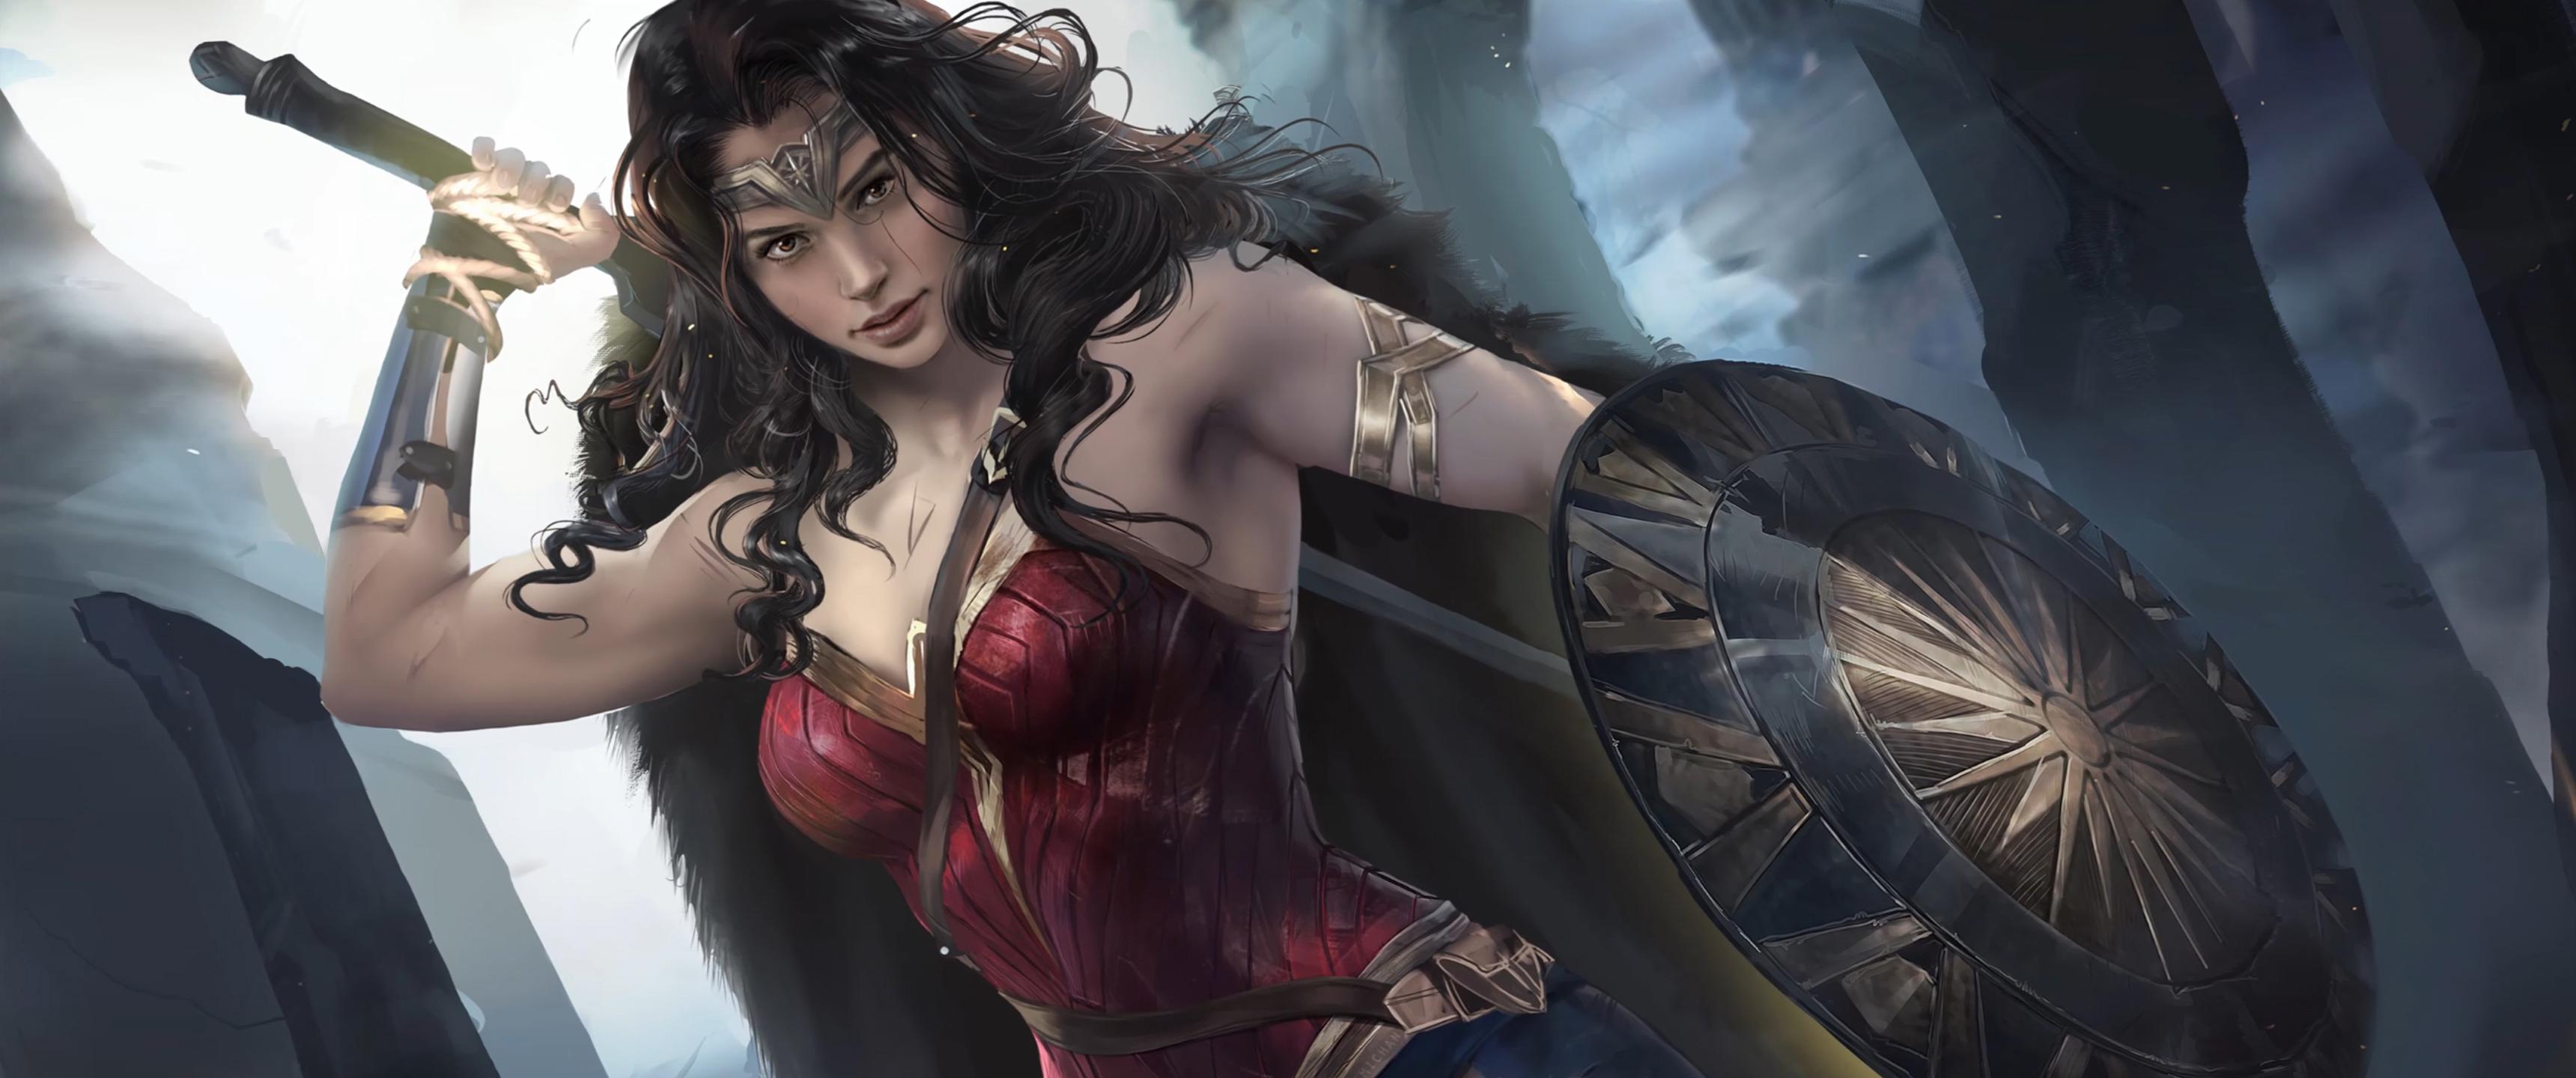 Wonder Woman (image mixed by me) x 1440: WidescreenWallpaper